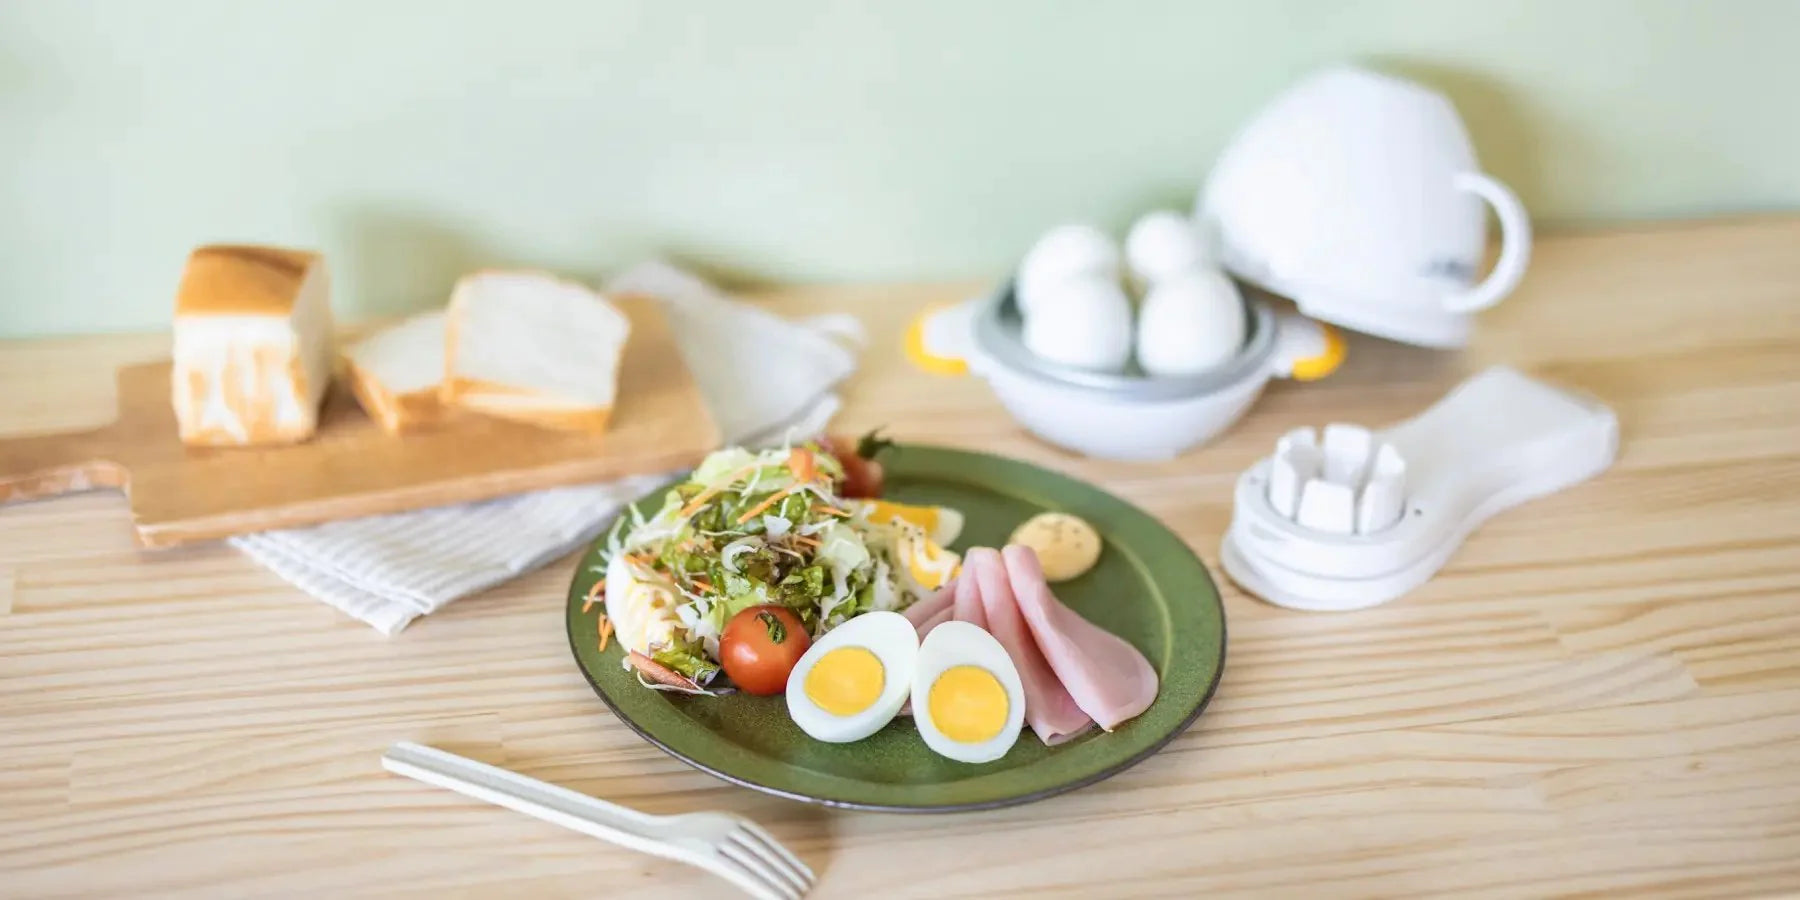 Discover our great selection of Egg Cookers at Globalkitchen Japan.